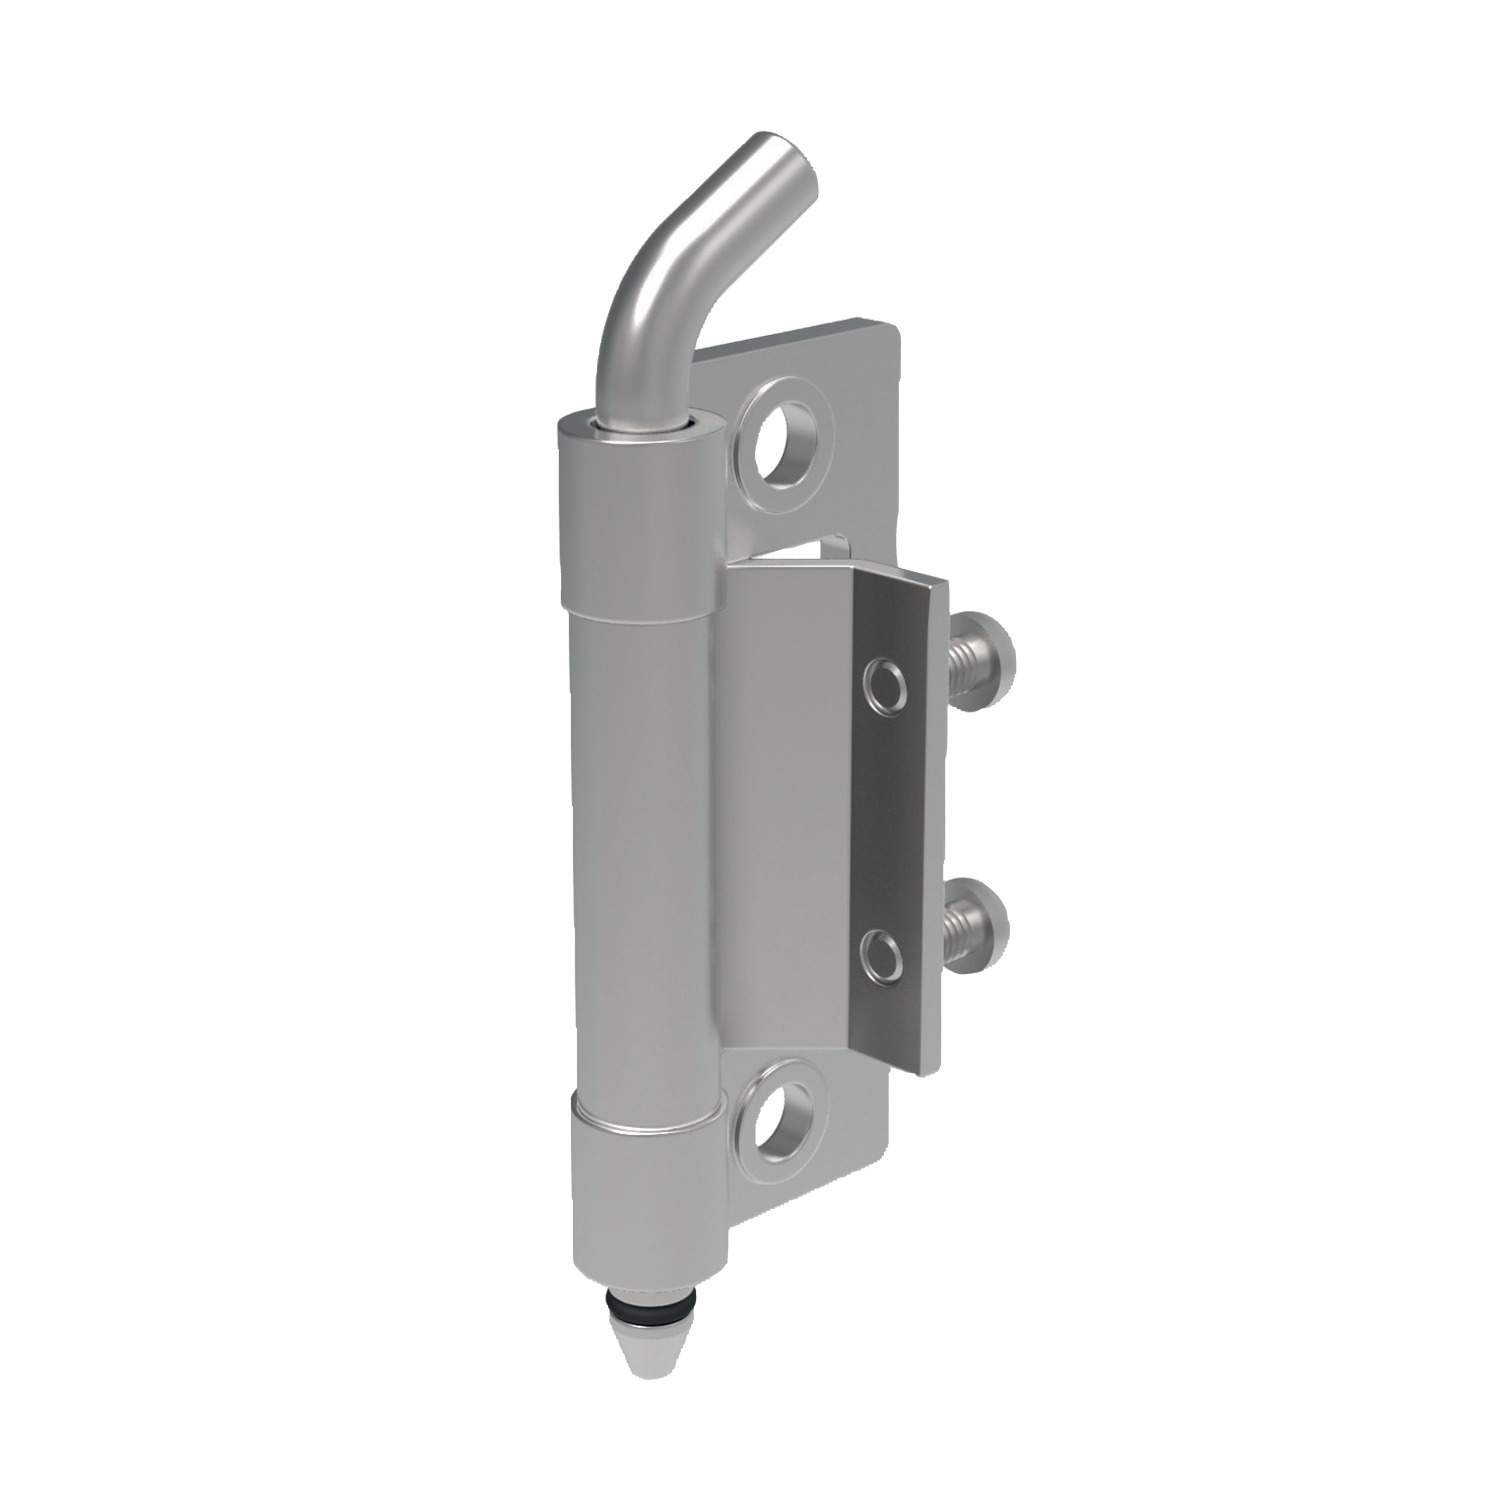 S2104 Concealed Pivot Hinges - Lift Off